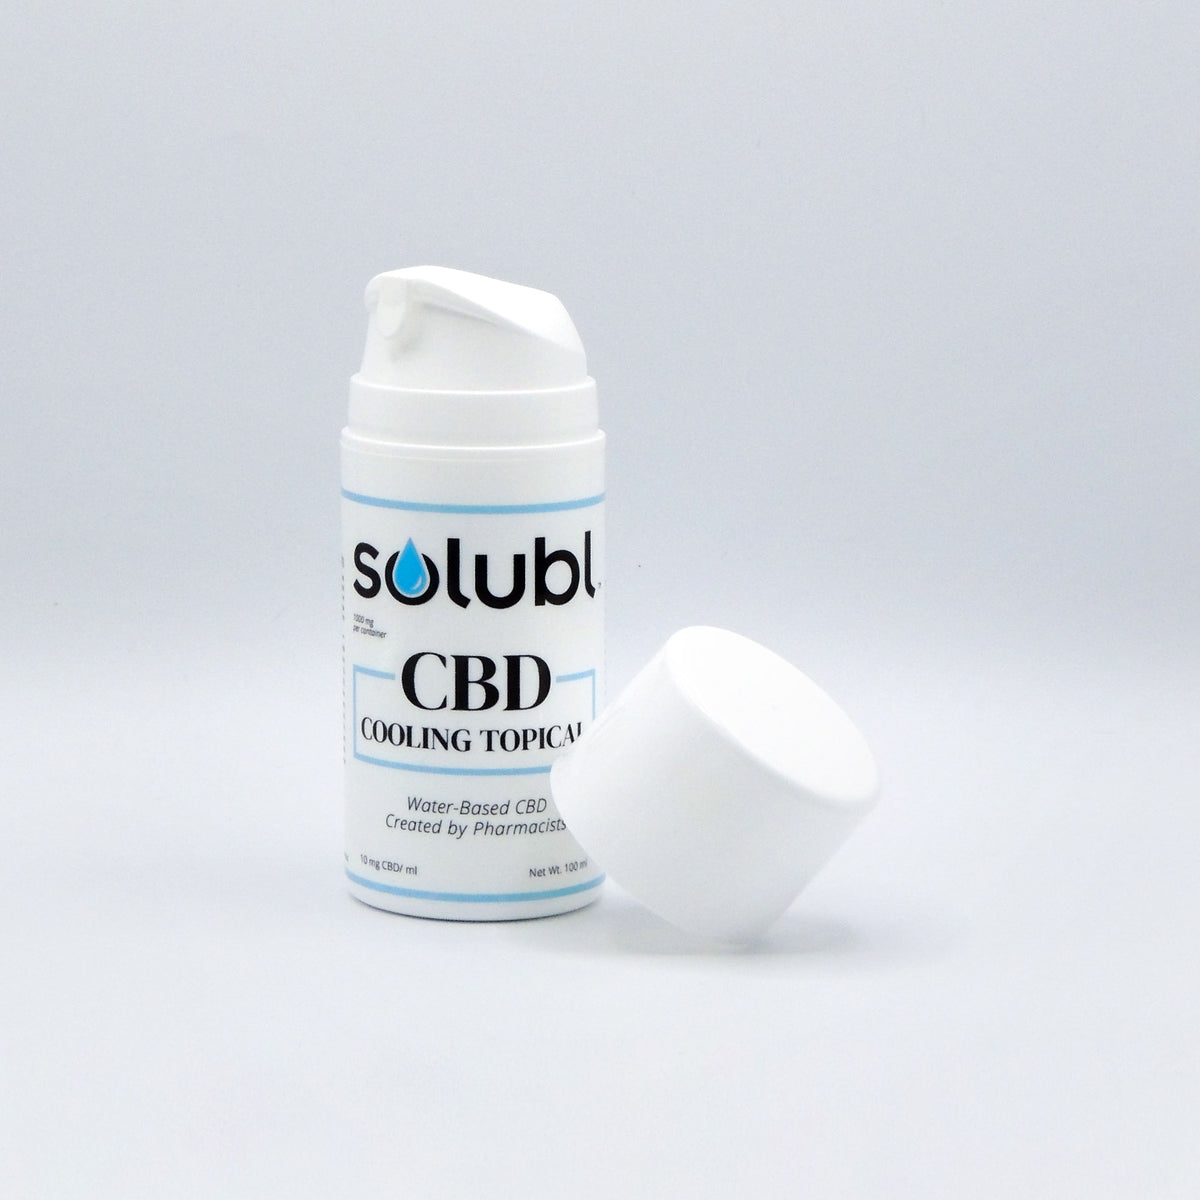 SOLUBL Cooling Topical (1000mg)